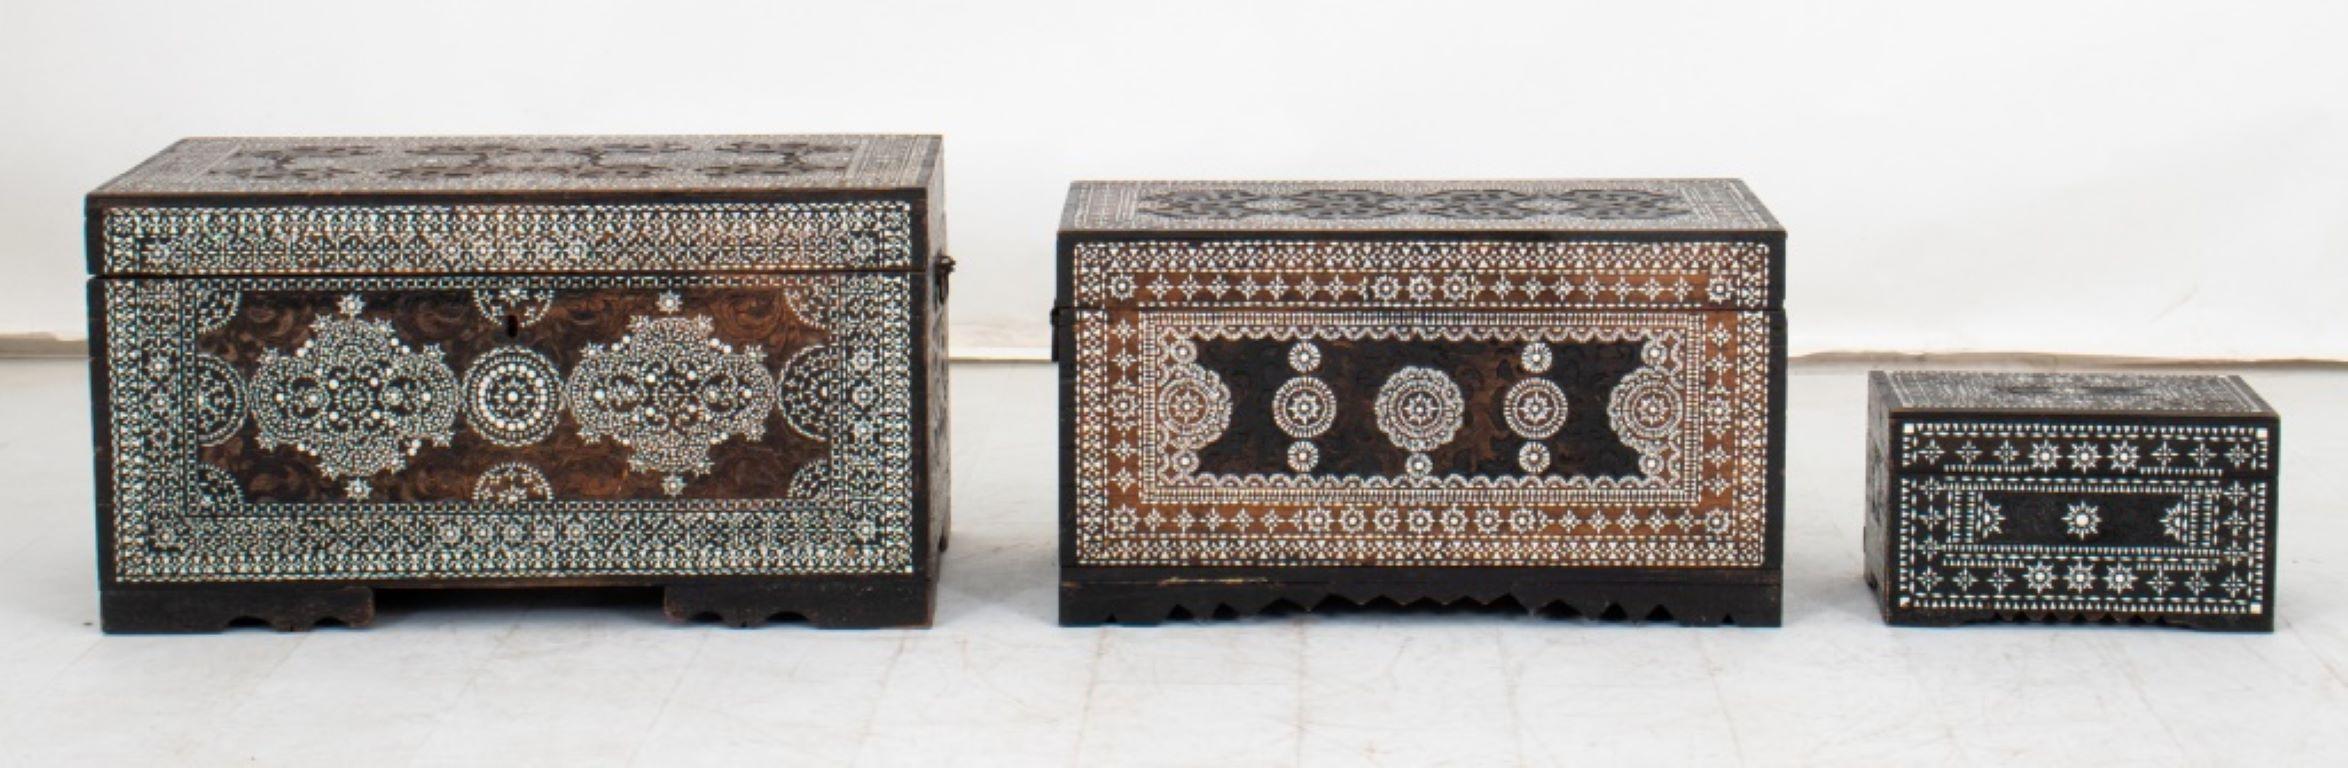 Three Syrian Carved Walnut Chests with bone inlay.  Provenance: From a Manhattan Collection. 

Dealer: S138XX